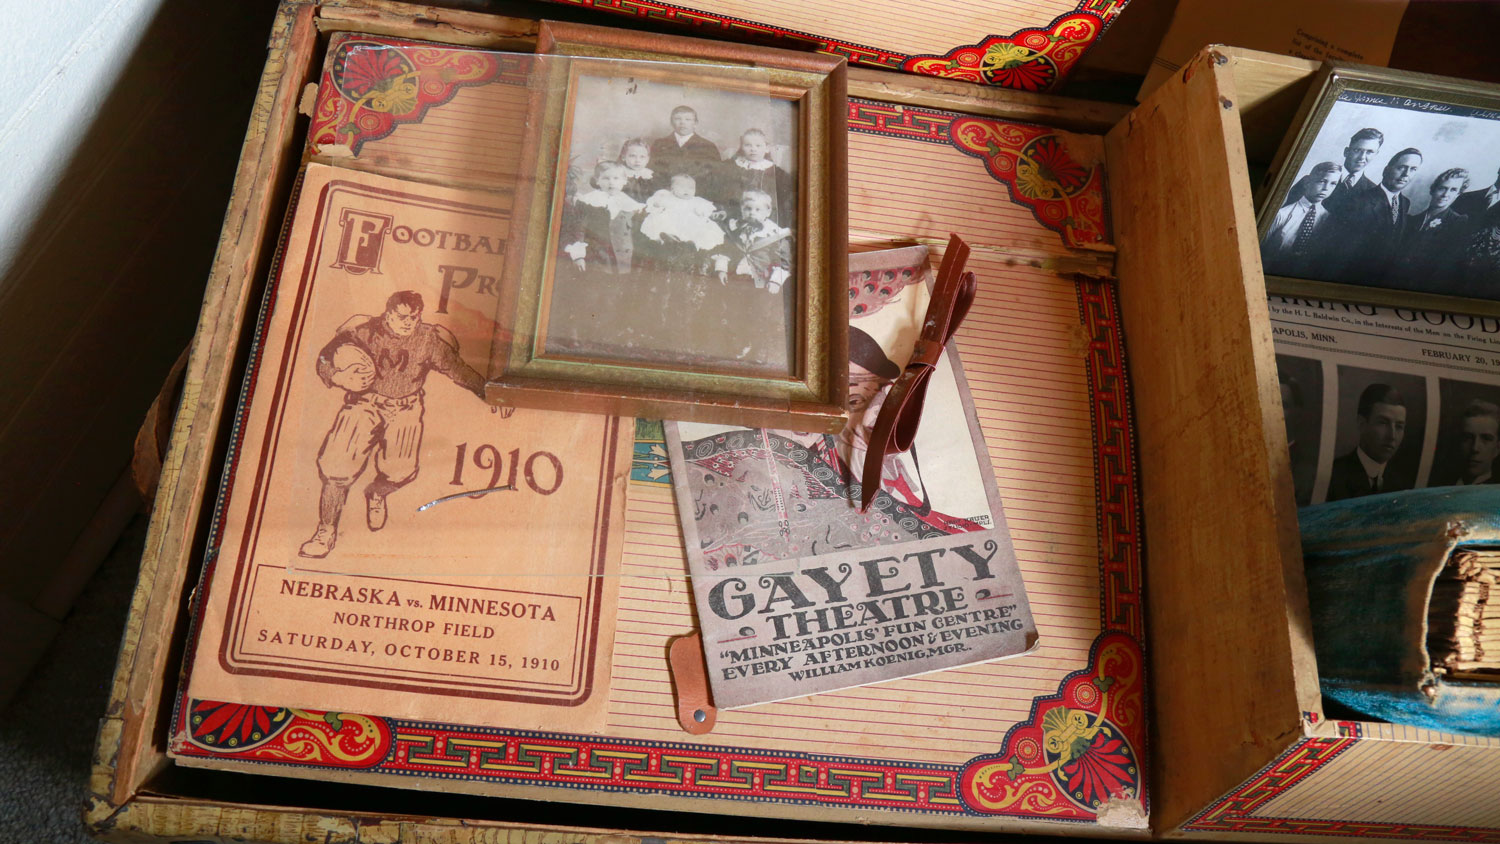 Old family photo, sports and theatre memorabilia are on display.